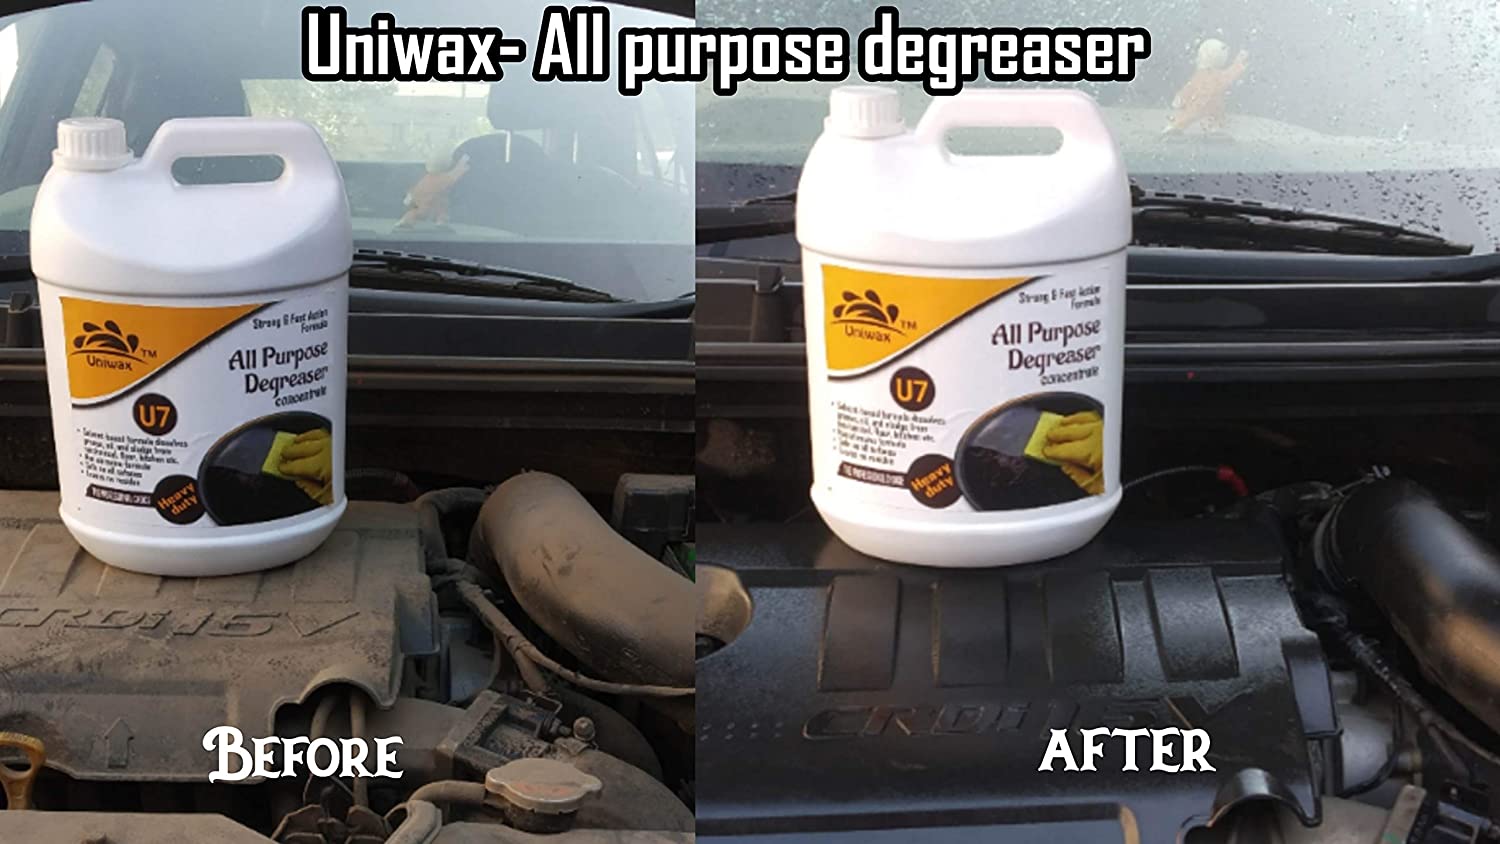 uniwax-u7-all-purpose-degreaser-concentrate-engine-cleaner-kitchen-cleaner-oven-cleaner-5-ltr